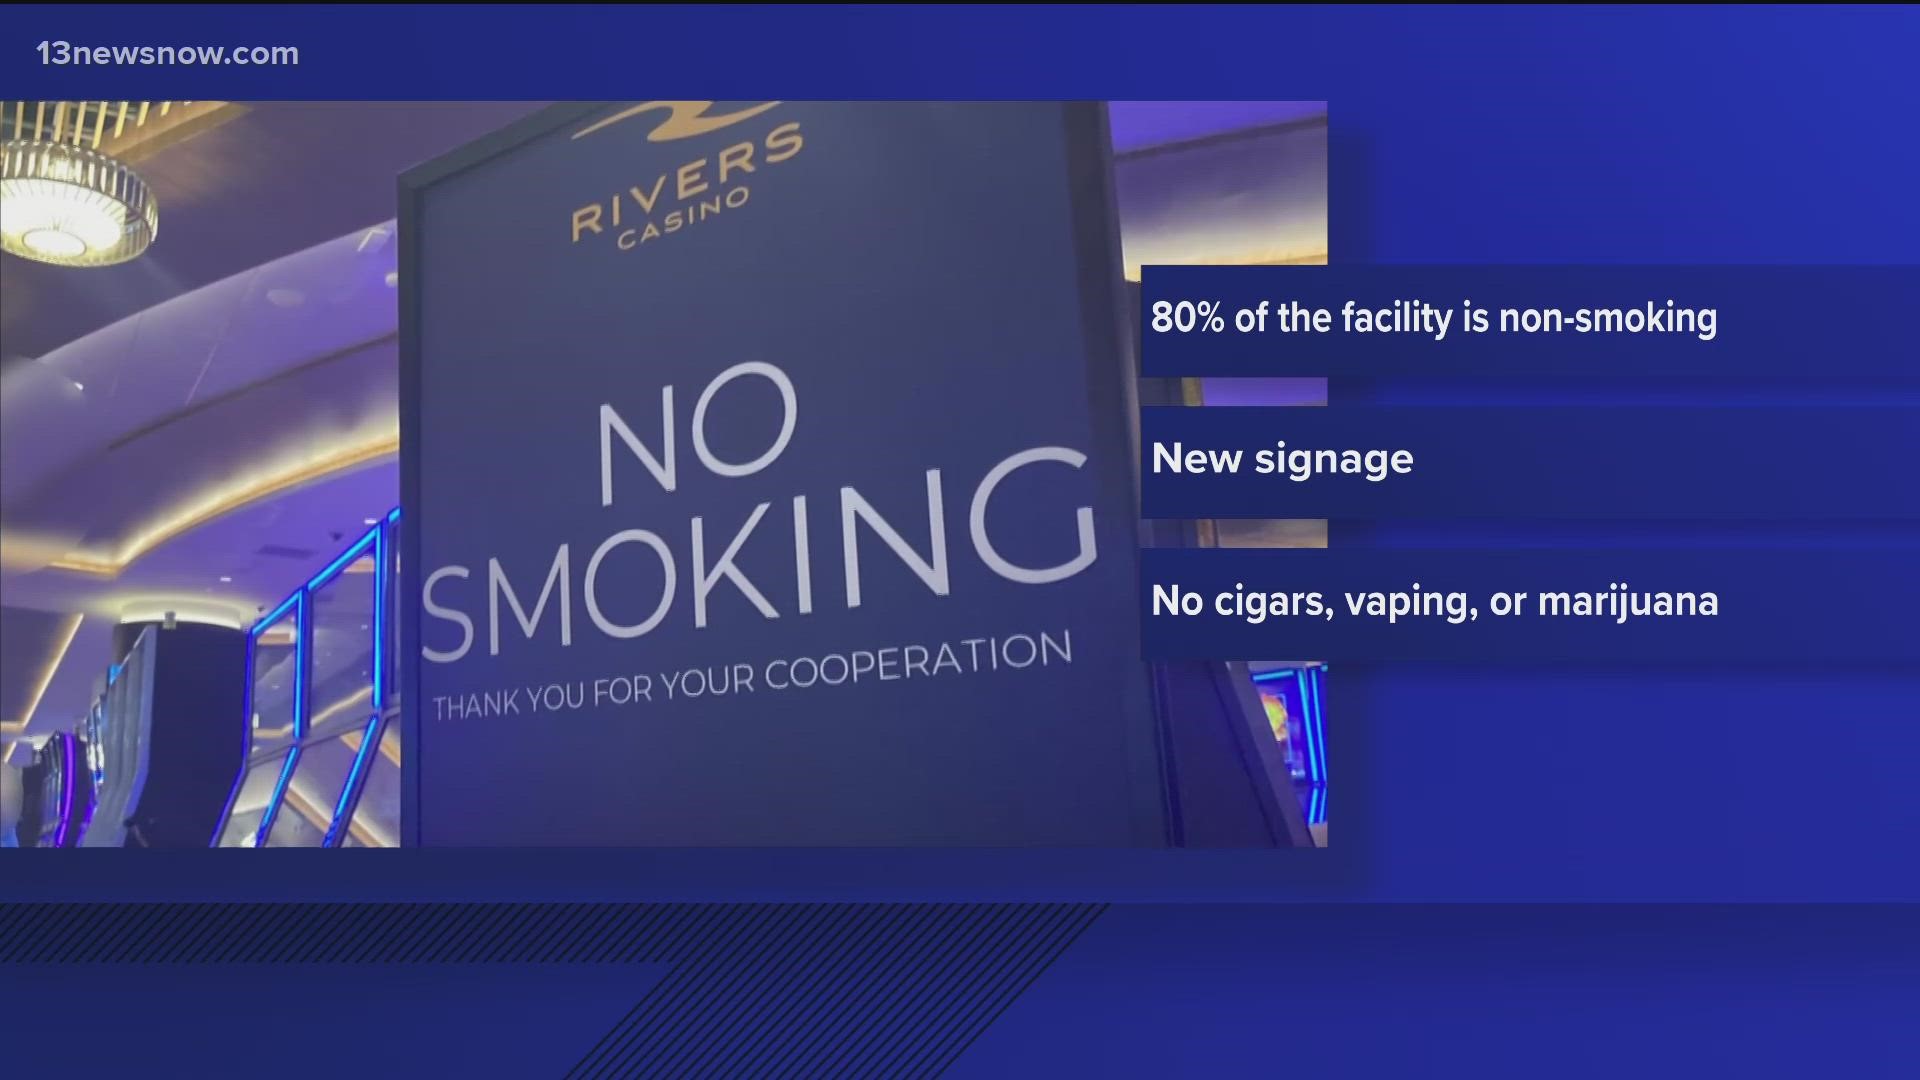 Many guests have complained about the strong smell inside the building. So, the casino says the facility now is 80% non-smoking, including half of the gaming floor.